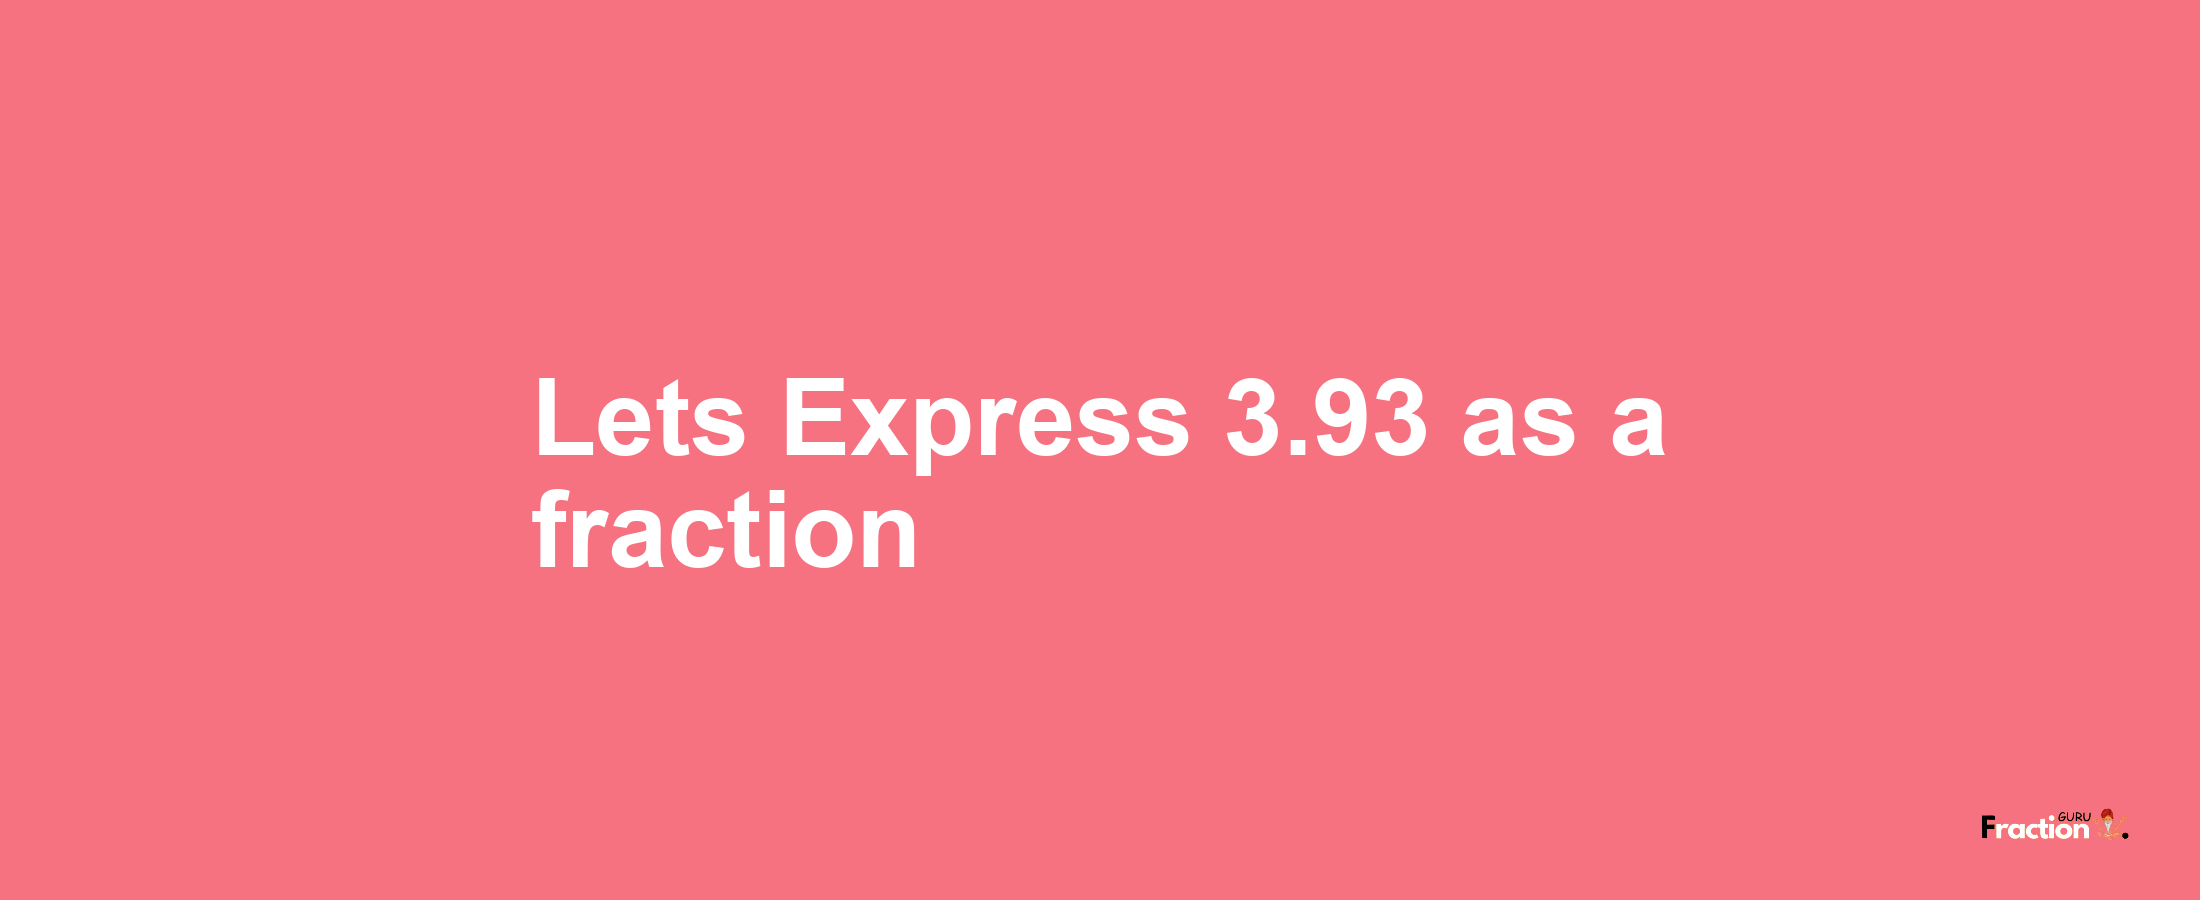 Lets Express 3.93 as afraction